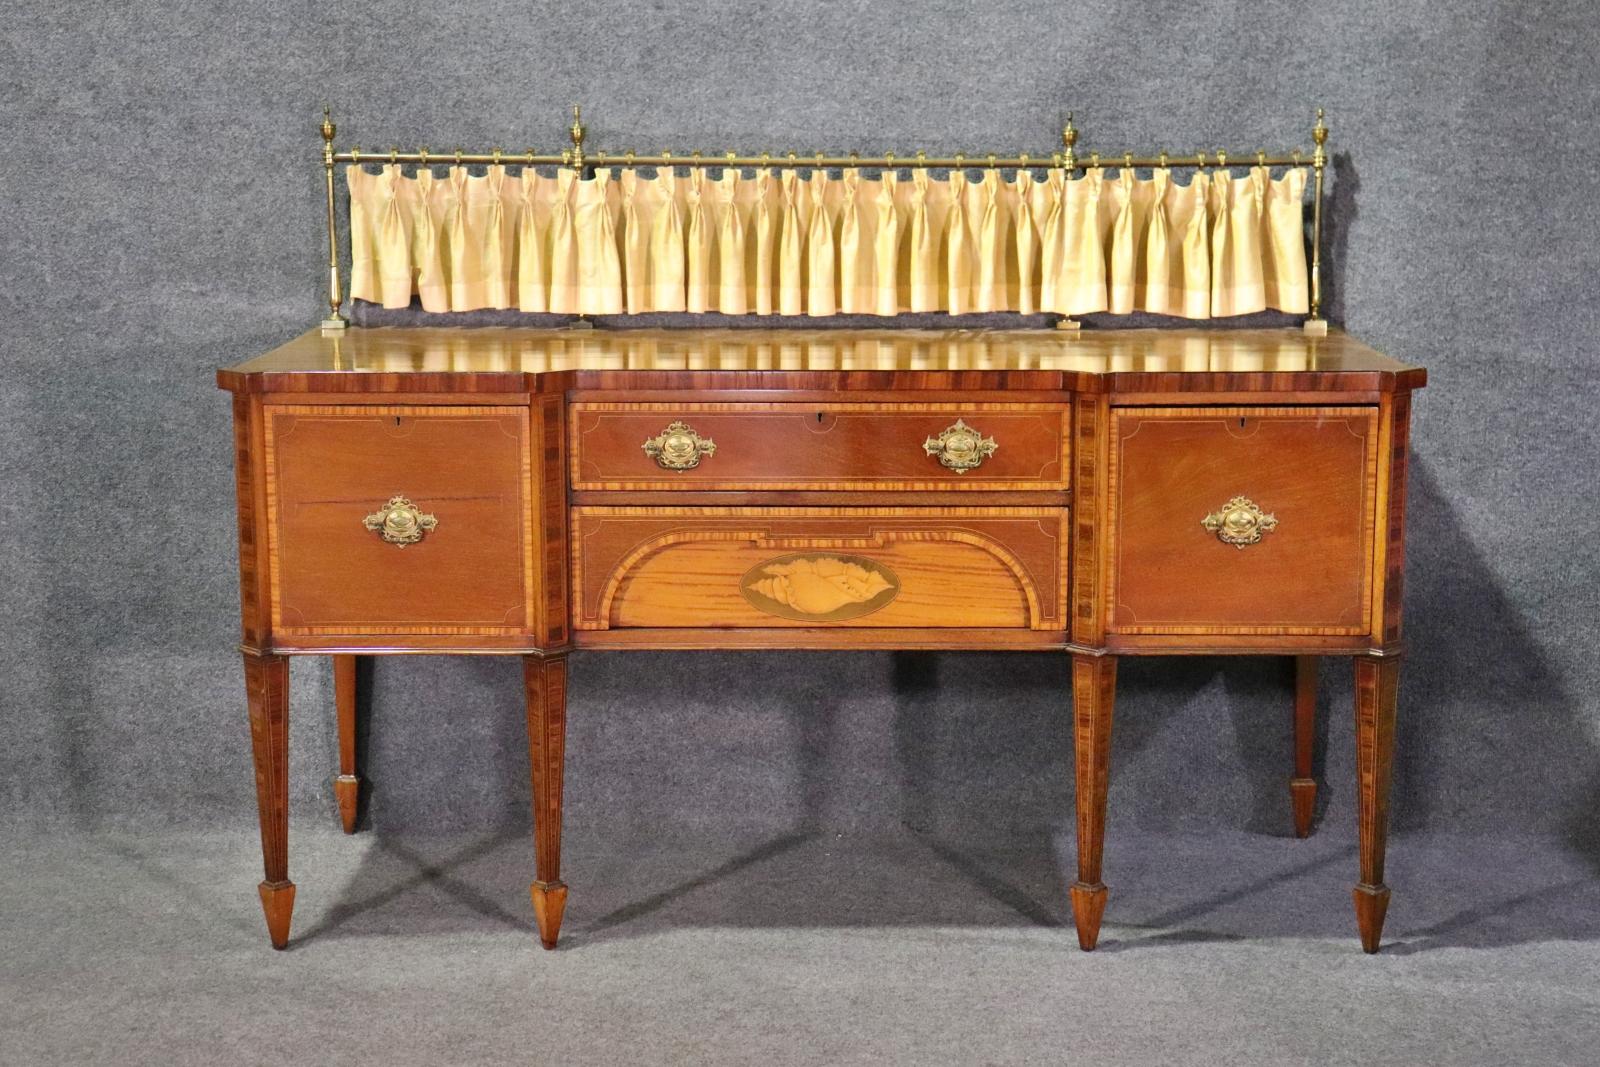 Early 20th Century Gorgeous Mahogany Sheraton English Sideboard with Cellarette and Brass Gallery